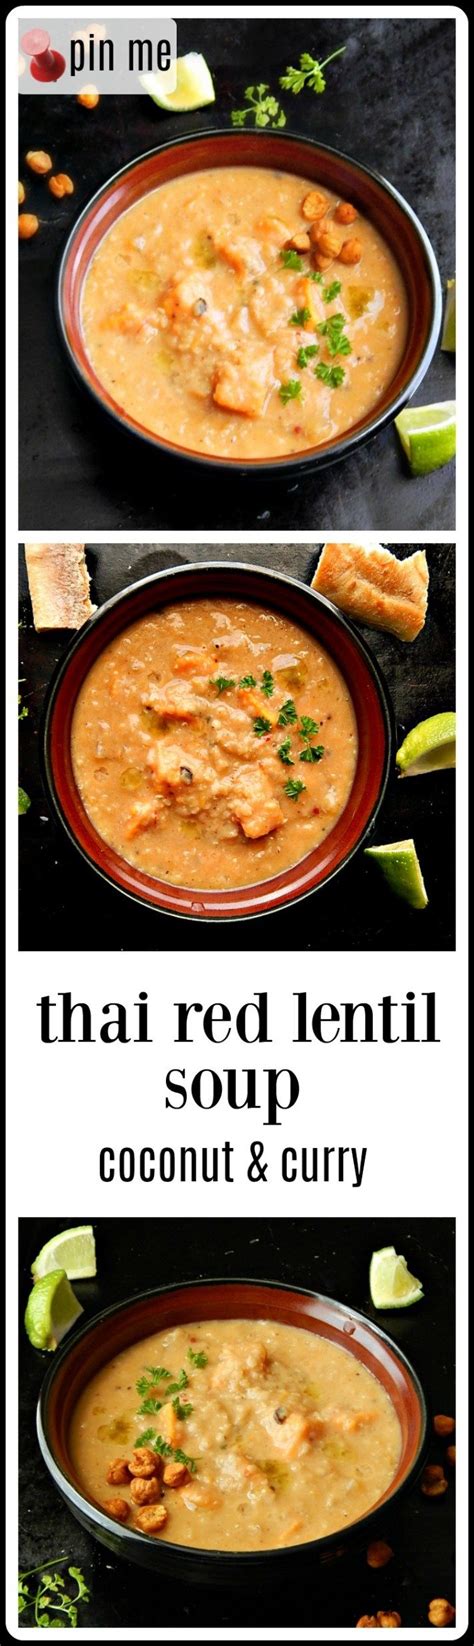 Add the cumin and coriander seeds and. Thai Red Lentil Soup with Coconut & Curry - Frugal ...